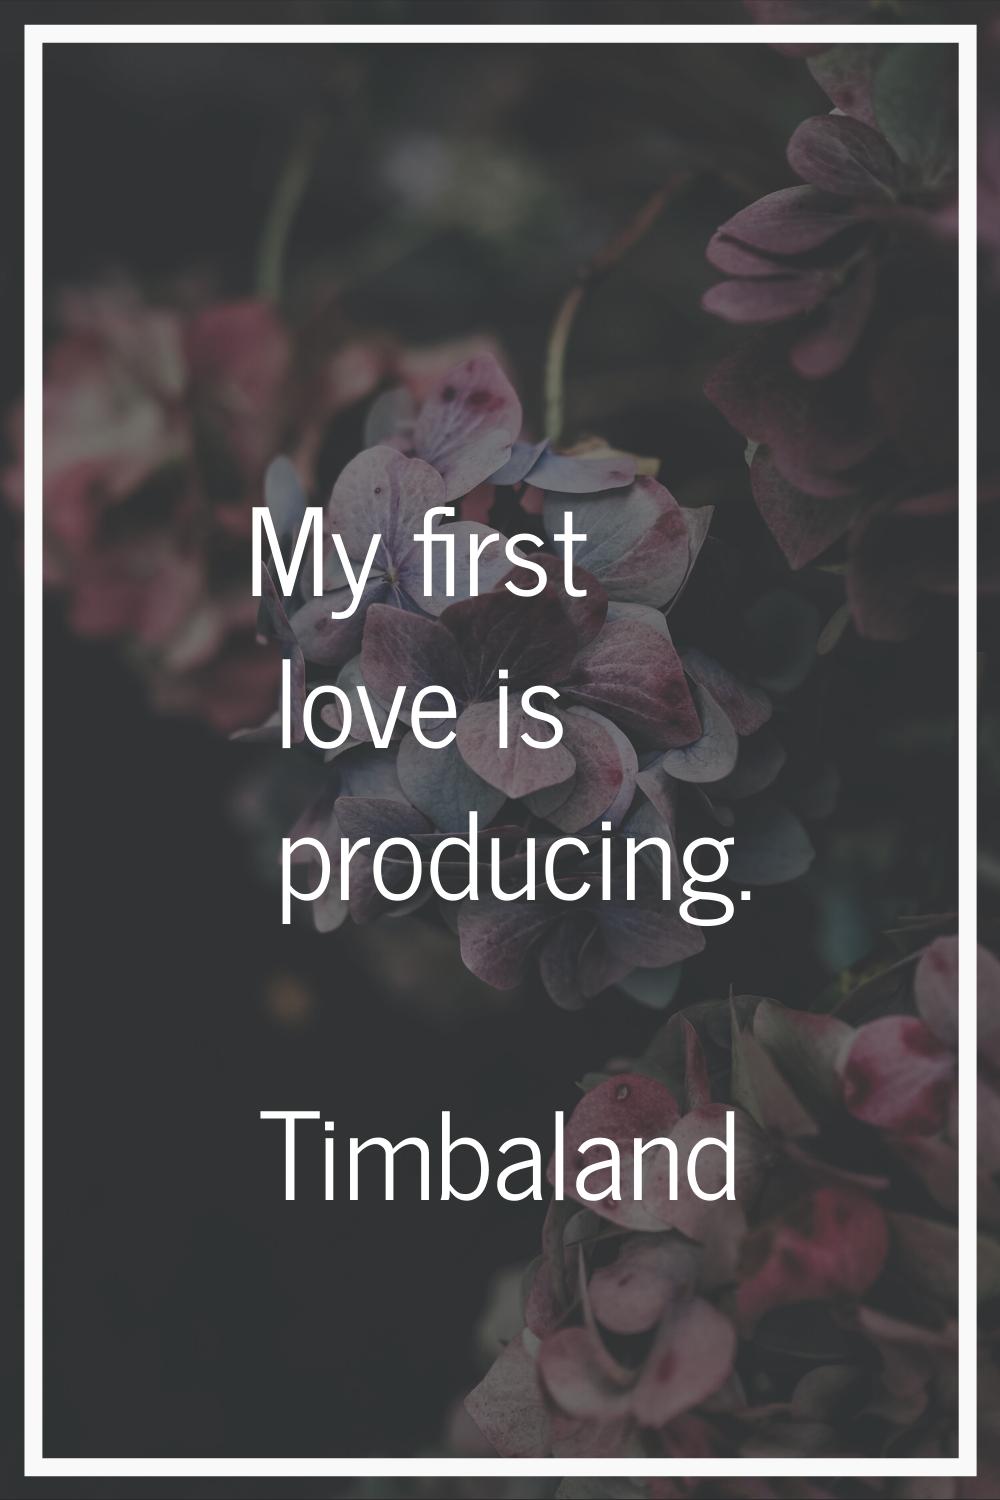 My first love is producing.